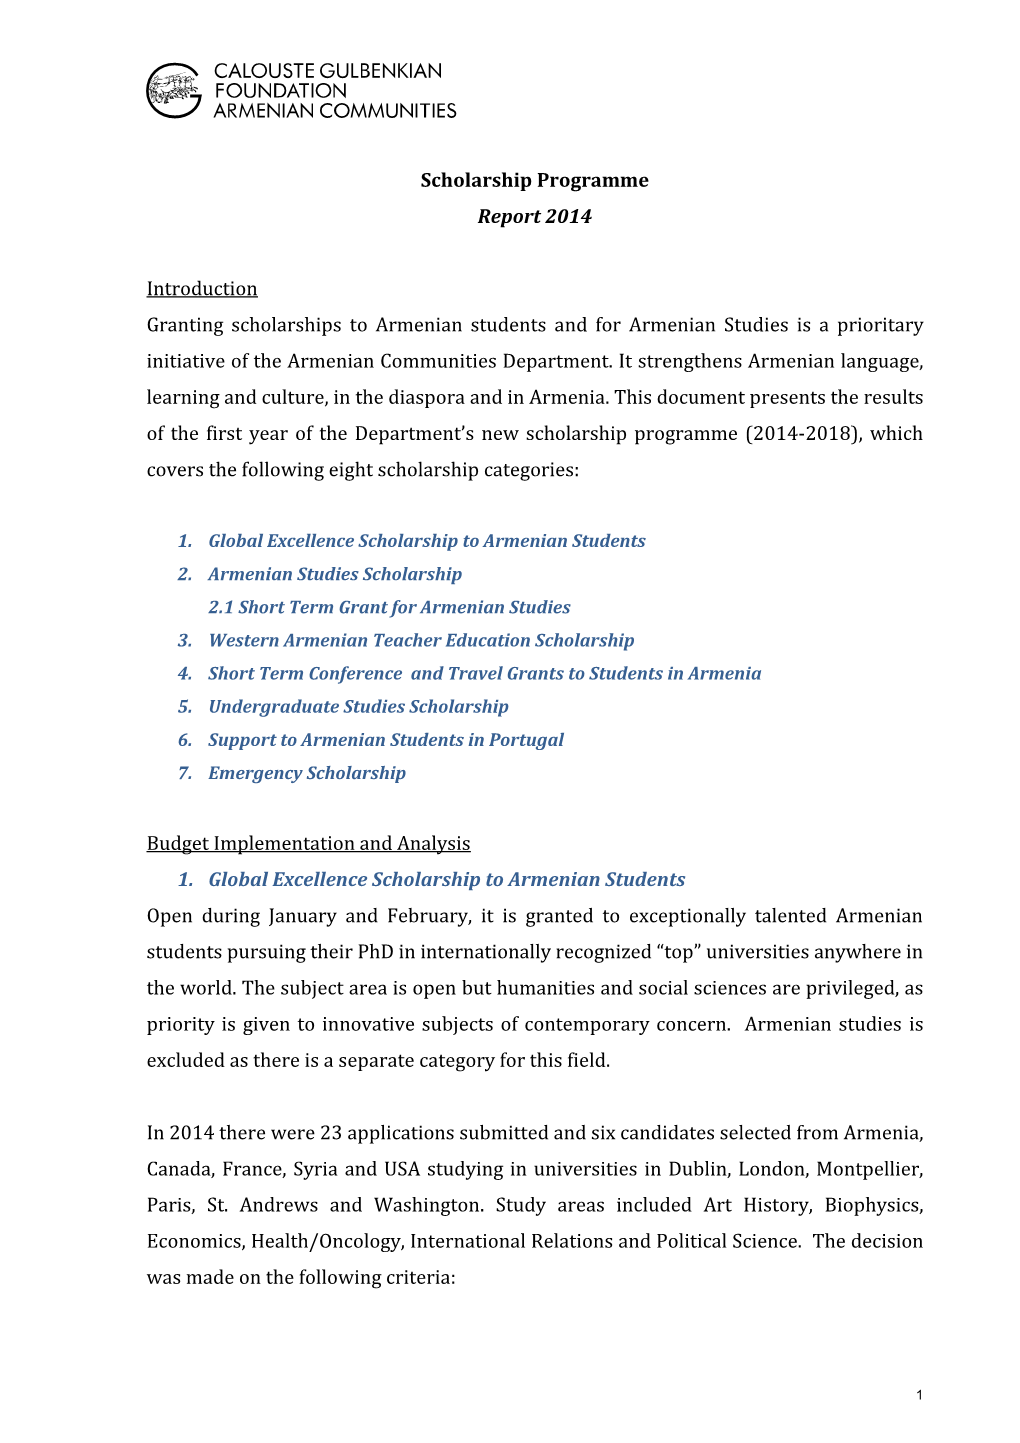 Scholarship Programme Report 2014 Introduction Granting Scholarships to Armenian Students and for Armenian Studies Is a Priorita